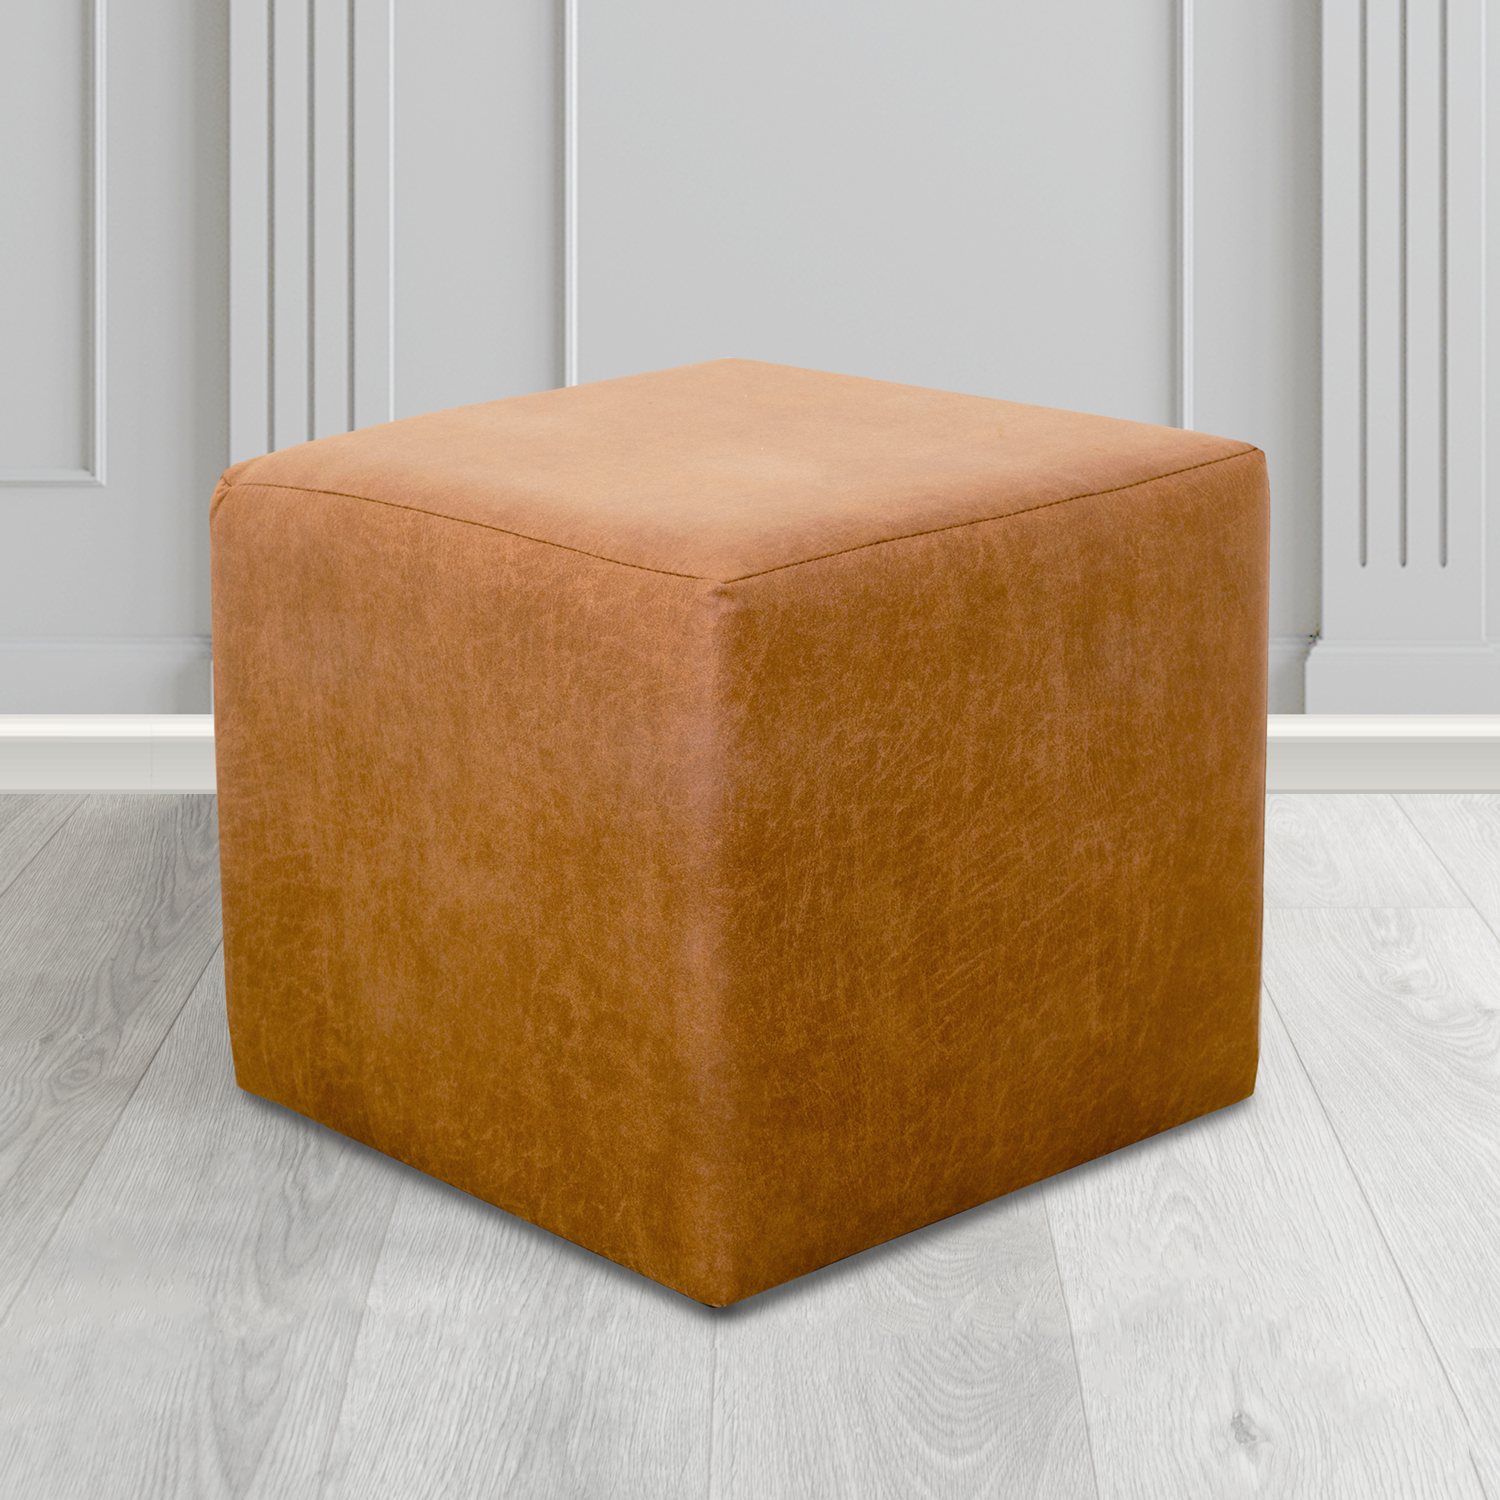 Paris Nevada Rust Faux Leather Cube Footstool - The Tub Chair Shop